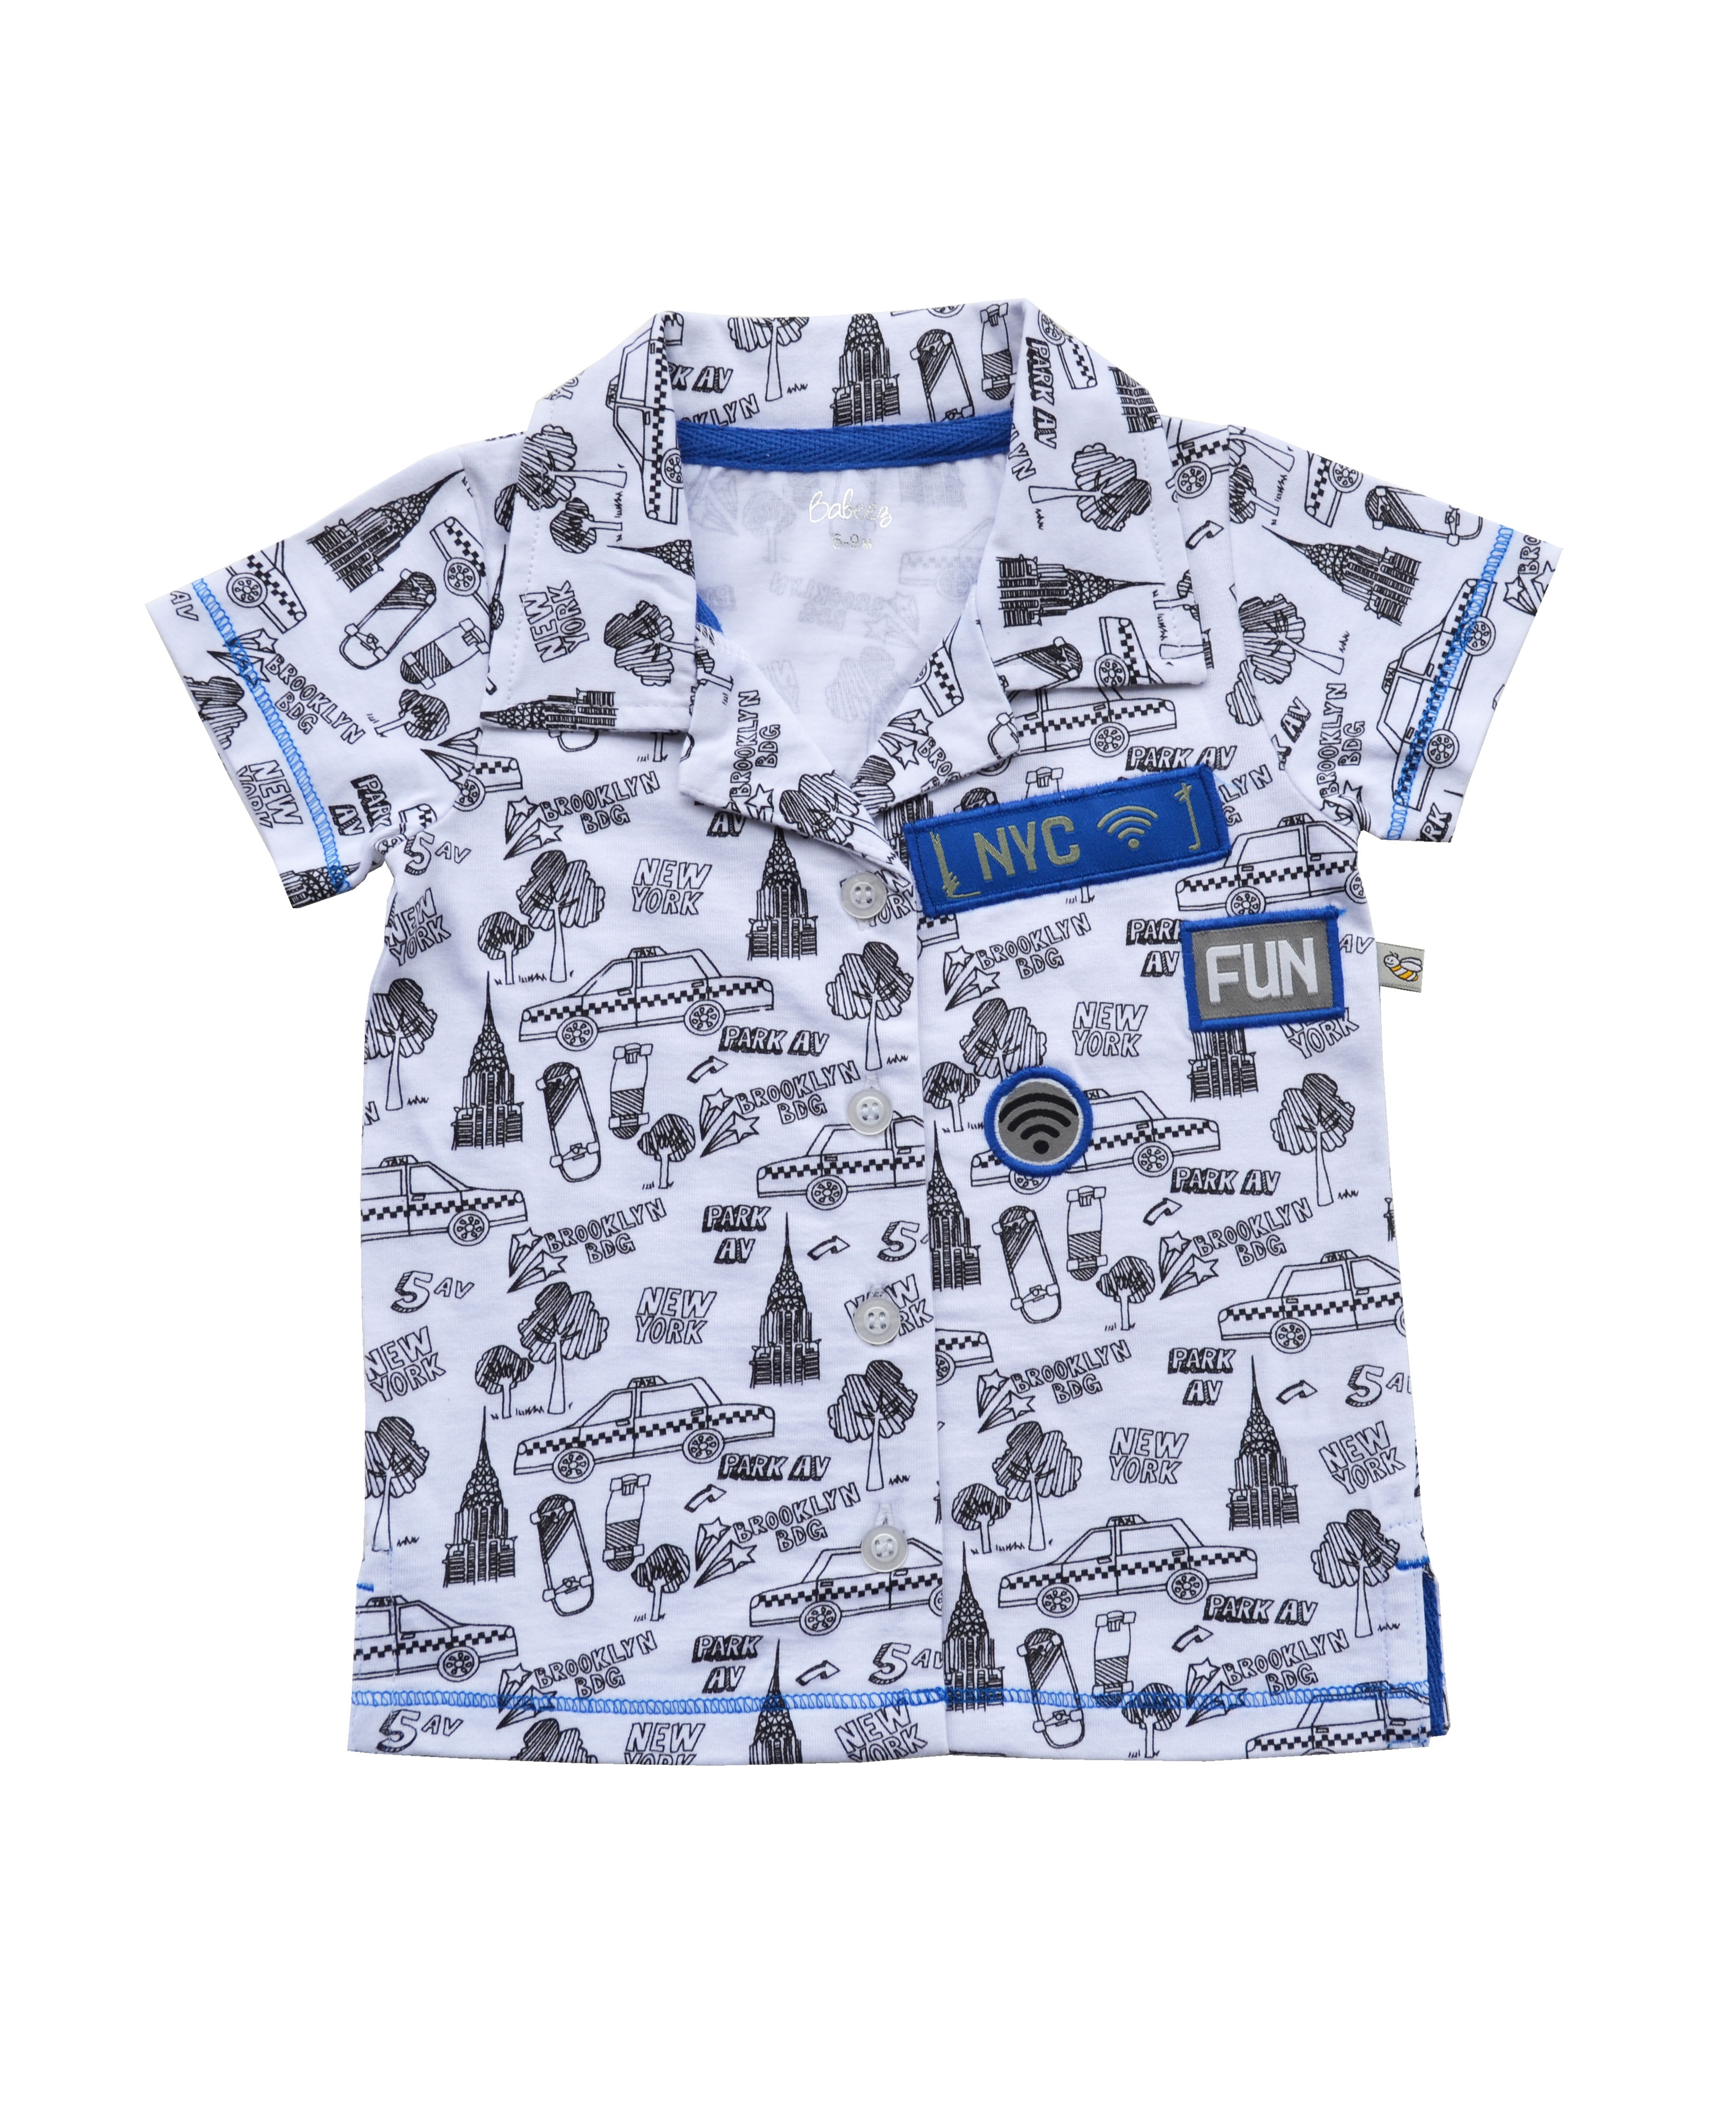 Babeez | Allover New York Print on White Short Sleeves Collared Shirt (100% Cotton Single Jersey) undefined